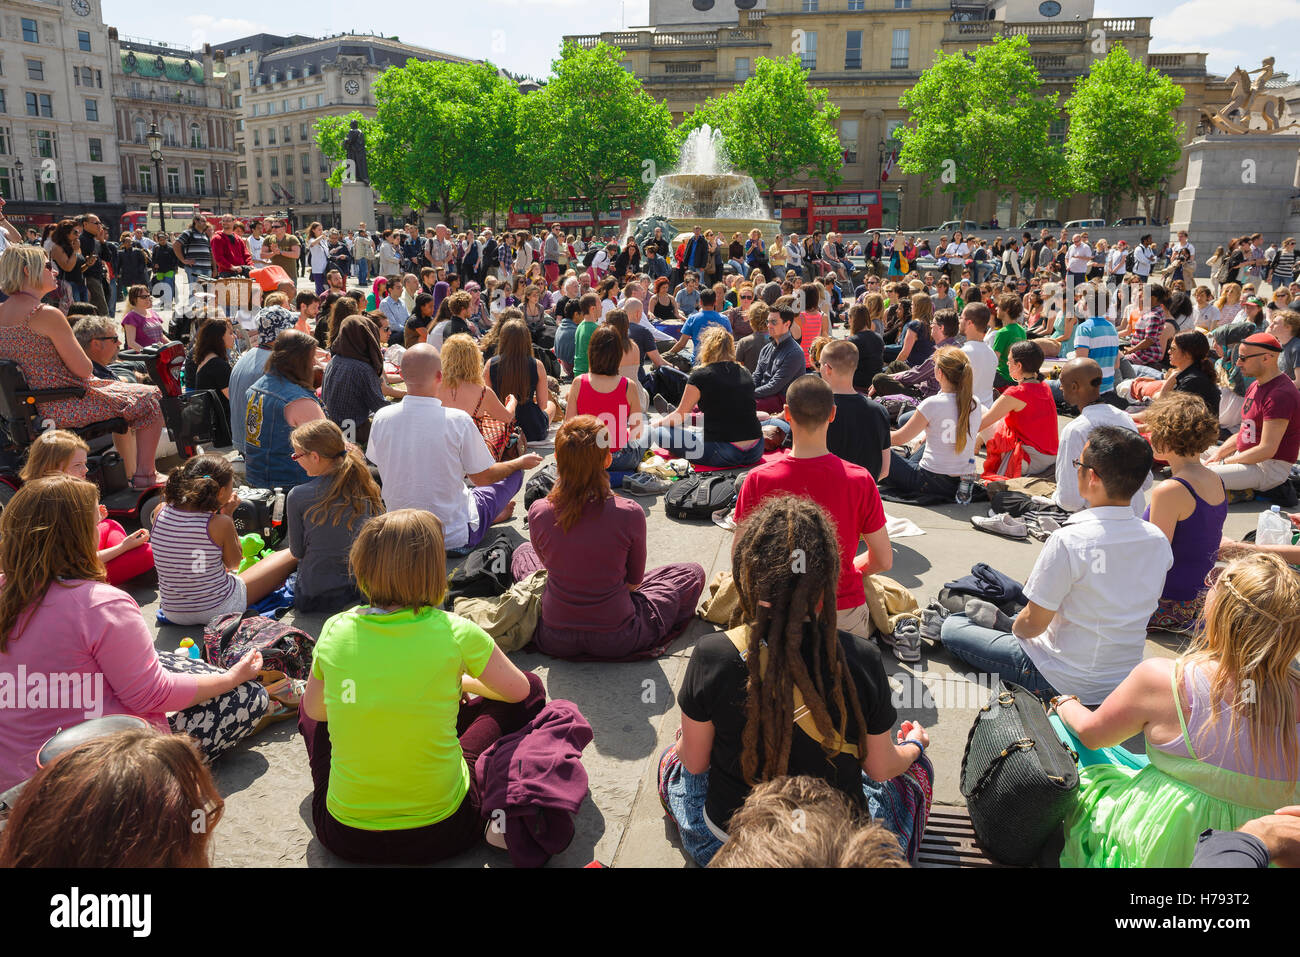 Meditation city, rear view of participants in a mass group meditation in Trafalgar Square, London, UK. Stock Photo